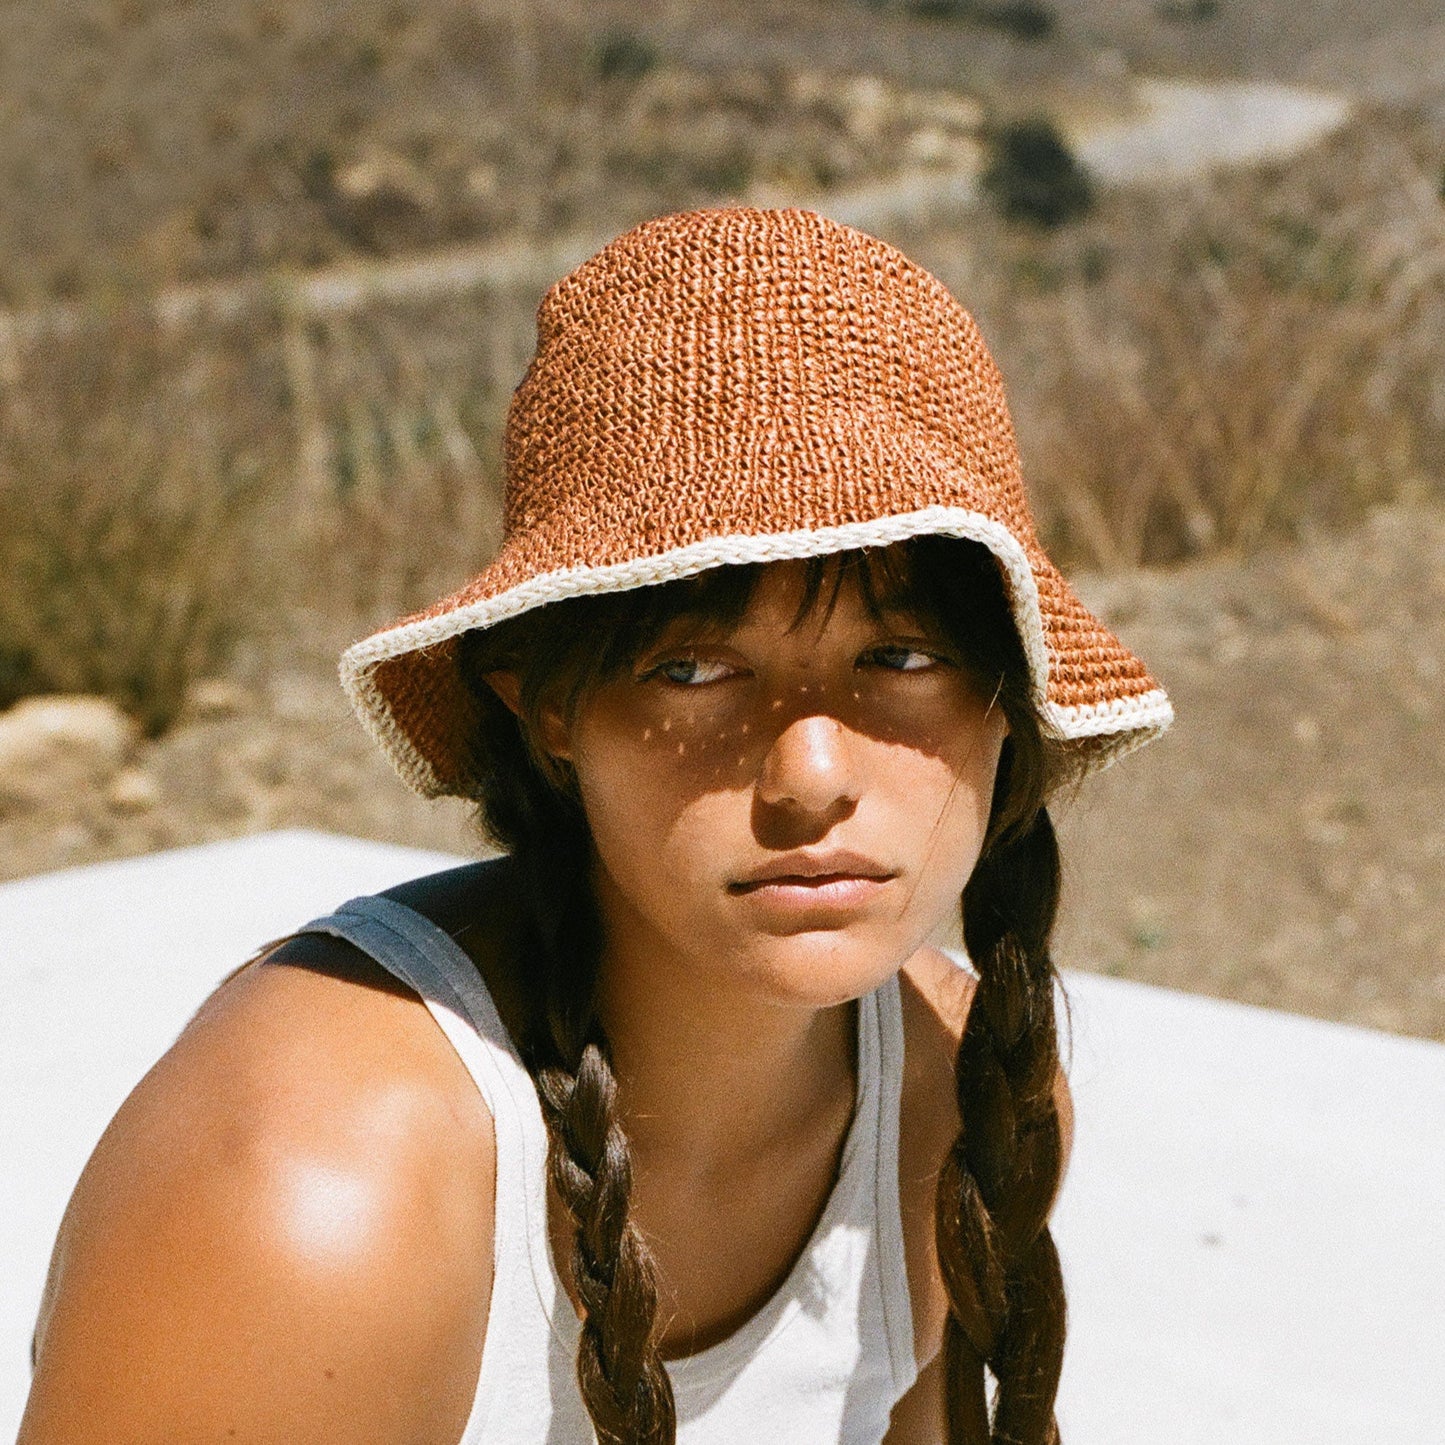 Summer Bucket Hat - Crocheted Orange by Made by Minga